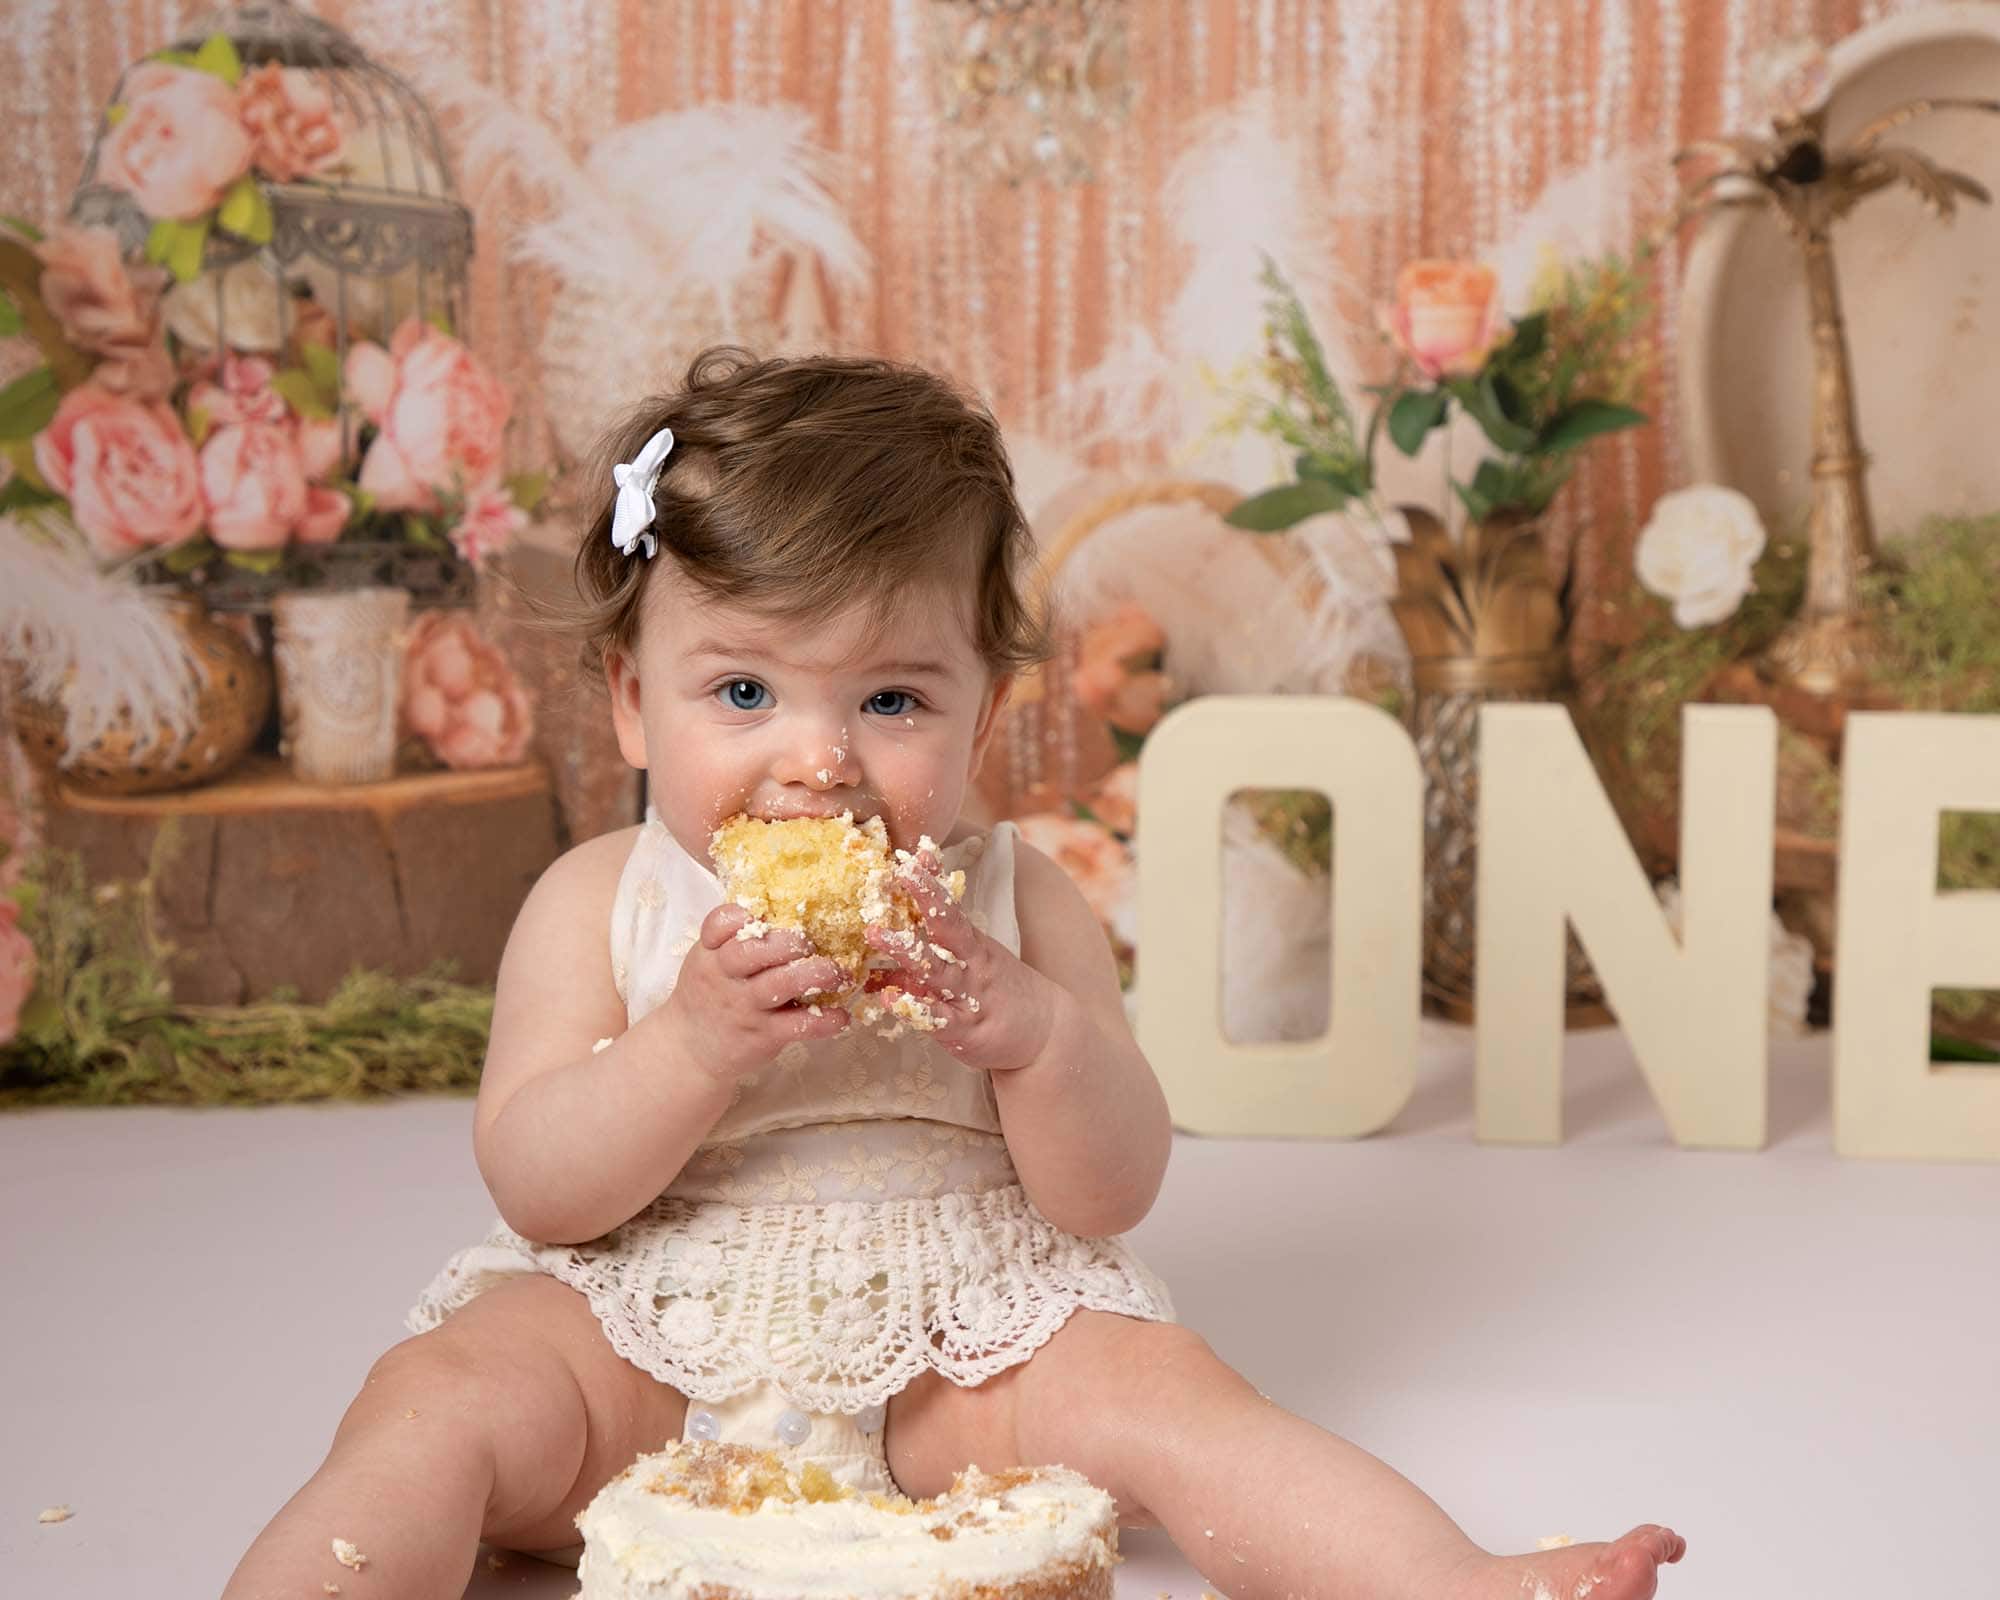 Baby girl in cream romper eating cake. Image at her 1st birthday photoshoot in Glasgow. Vintage backdrop in peach tones with cream one letters.